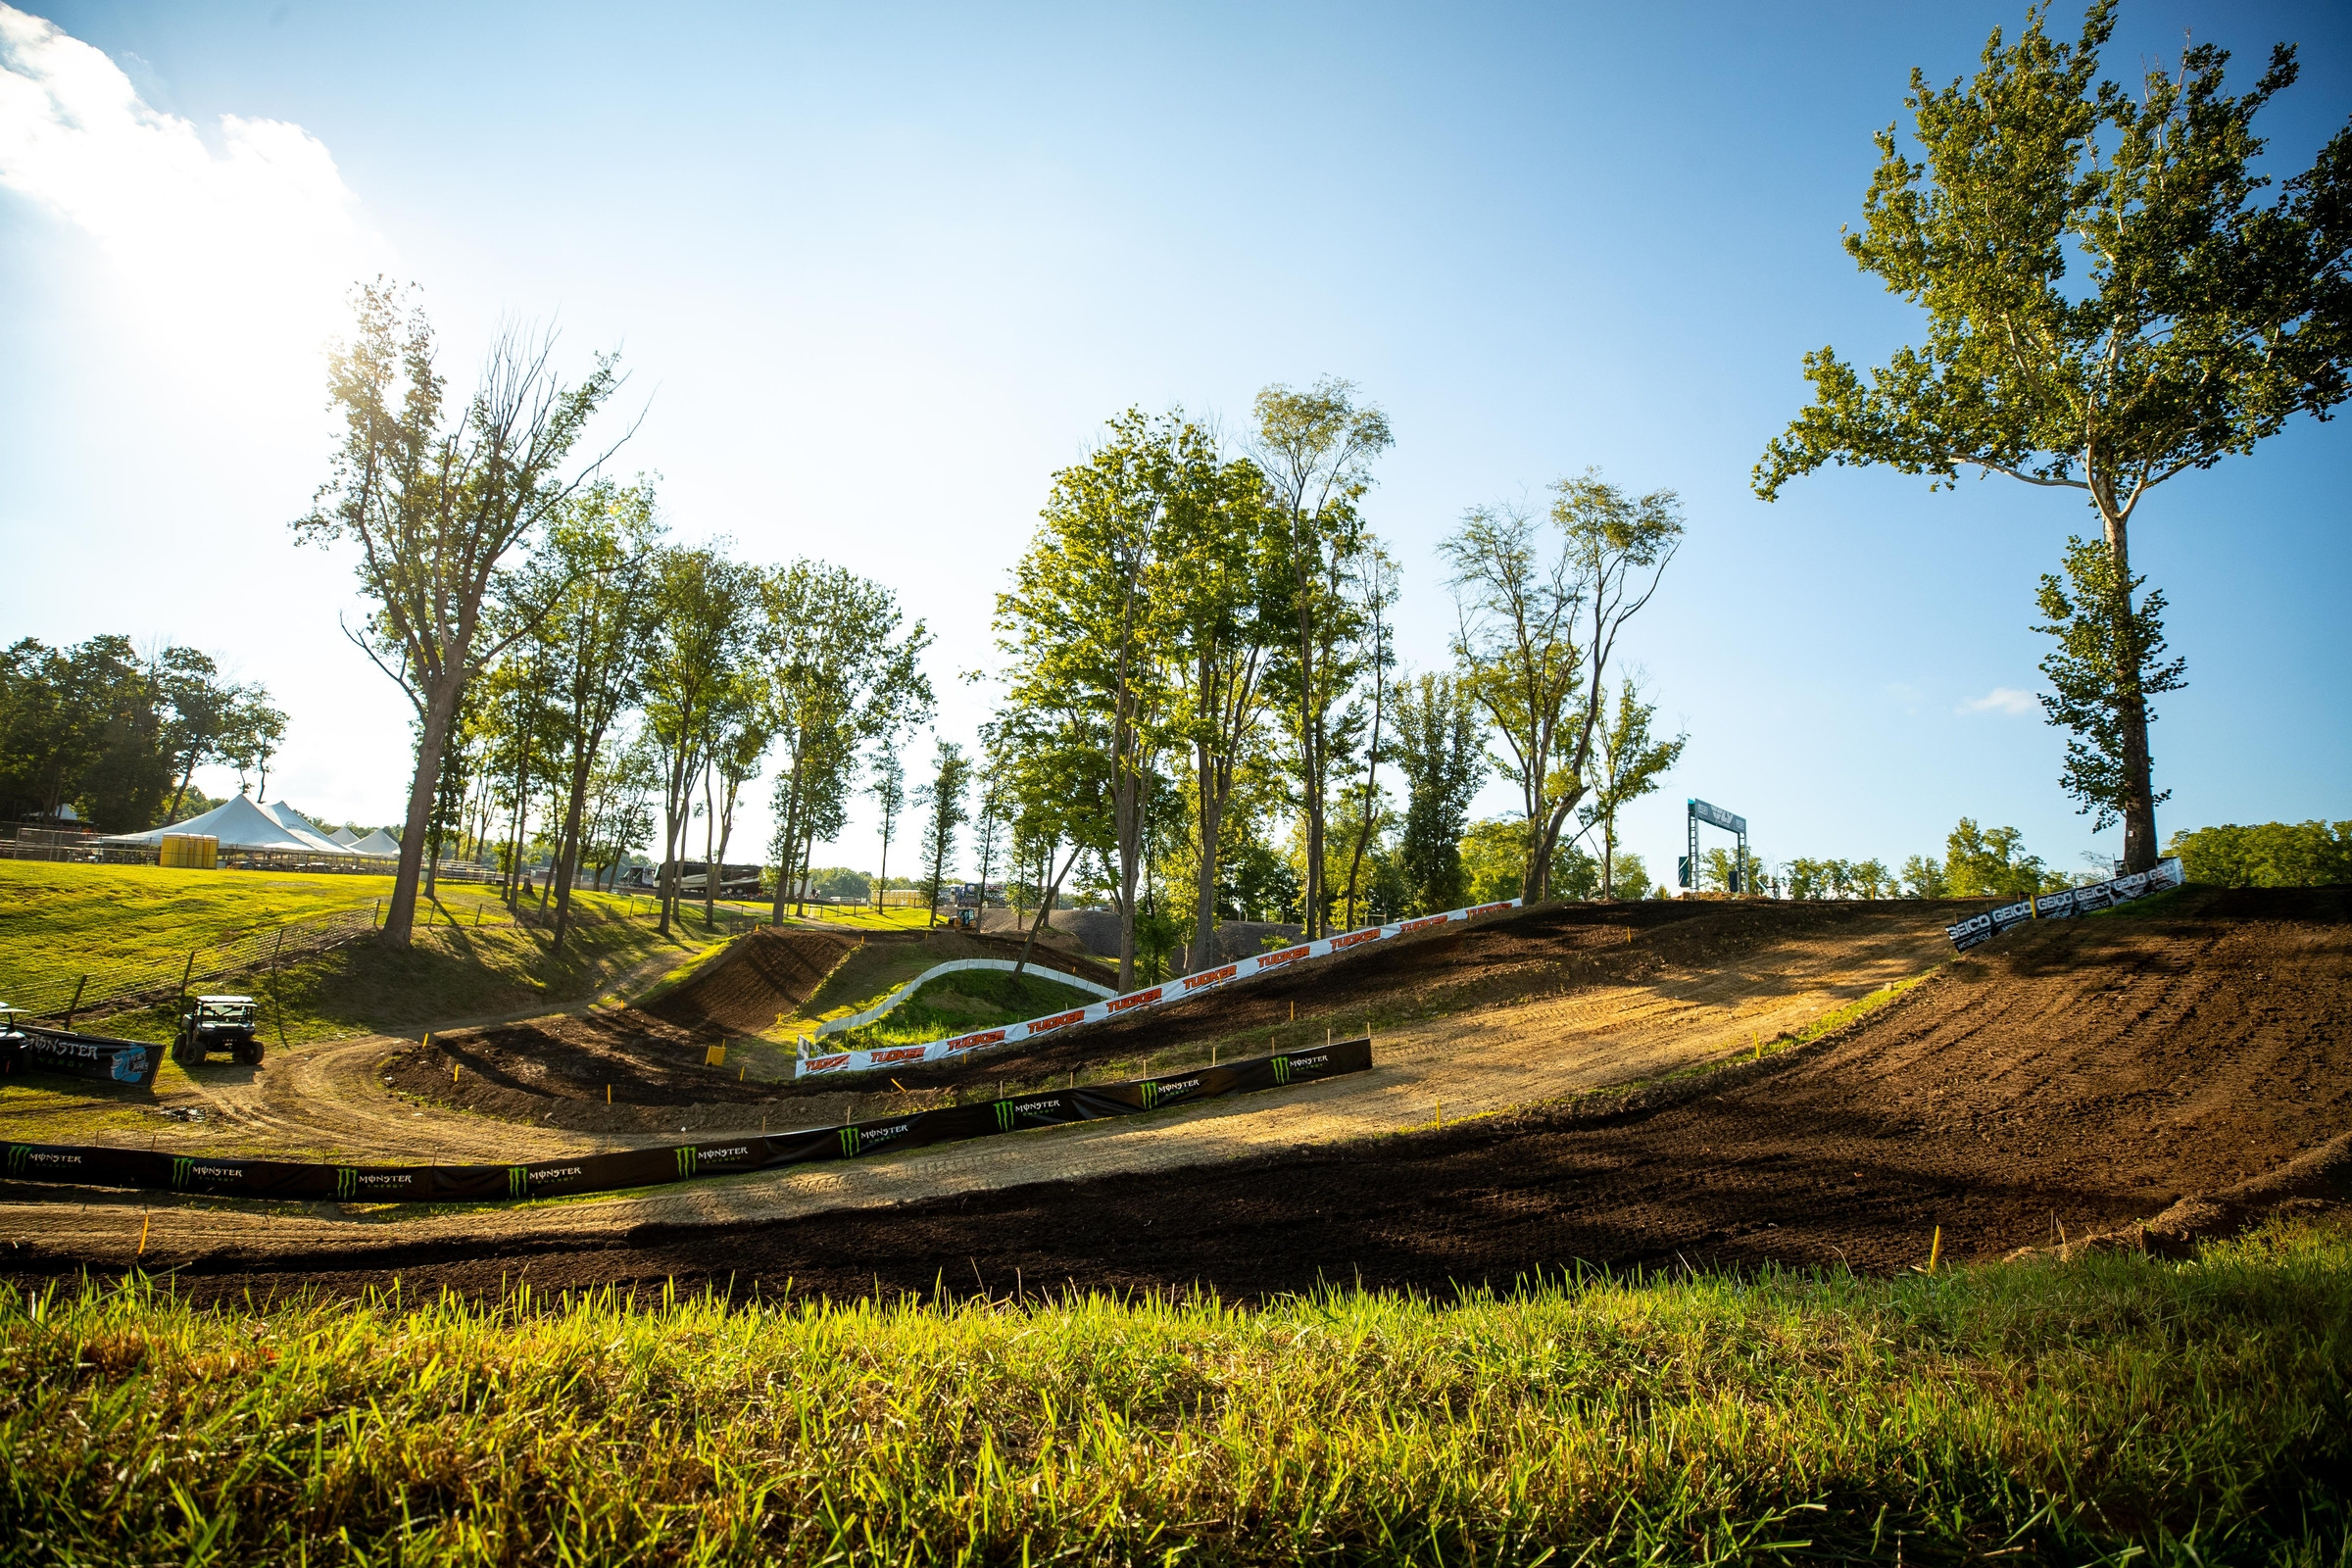 Live Updates from the 2022 Ironman Pro Motocross National